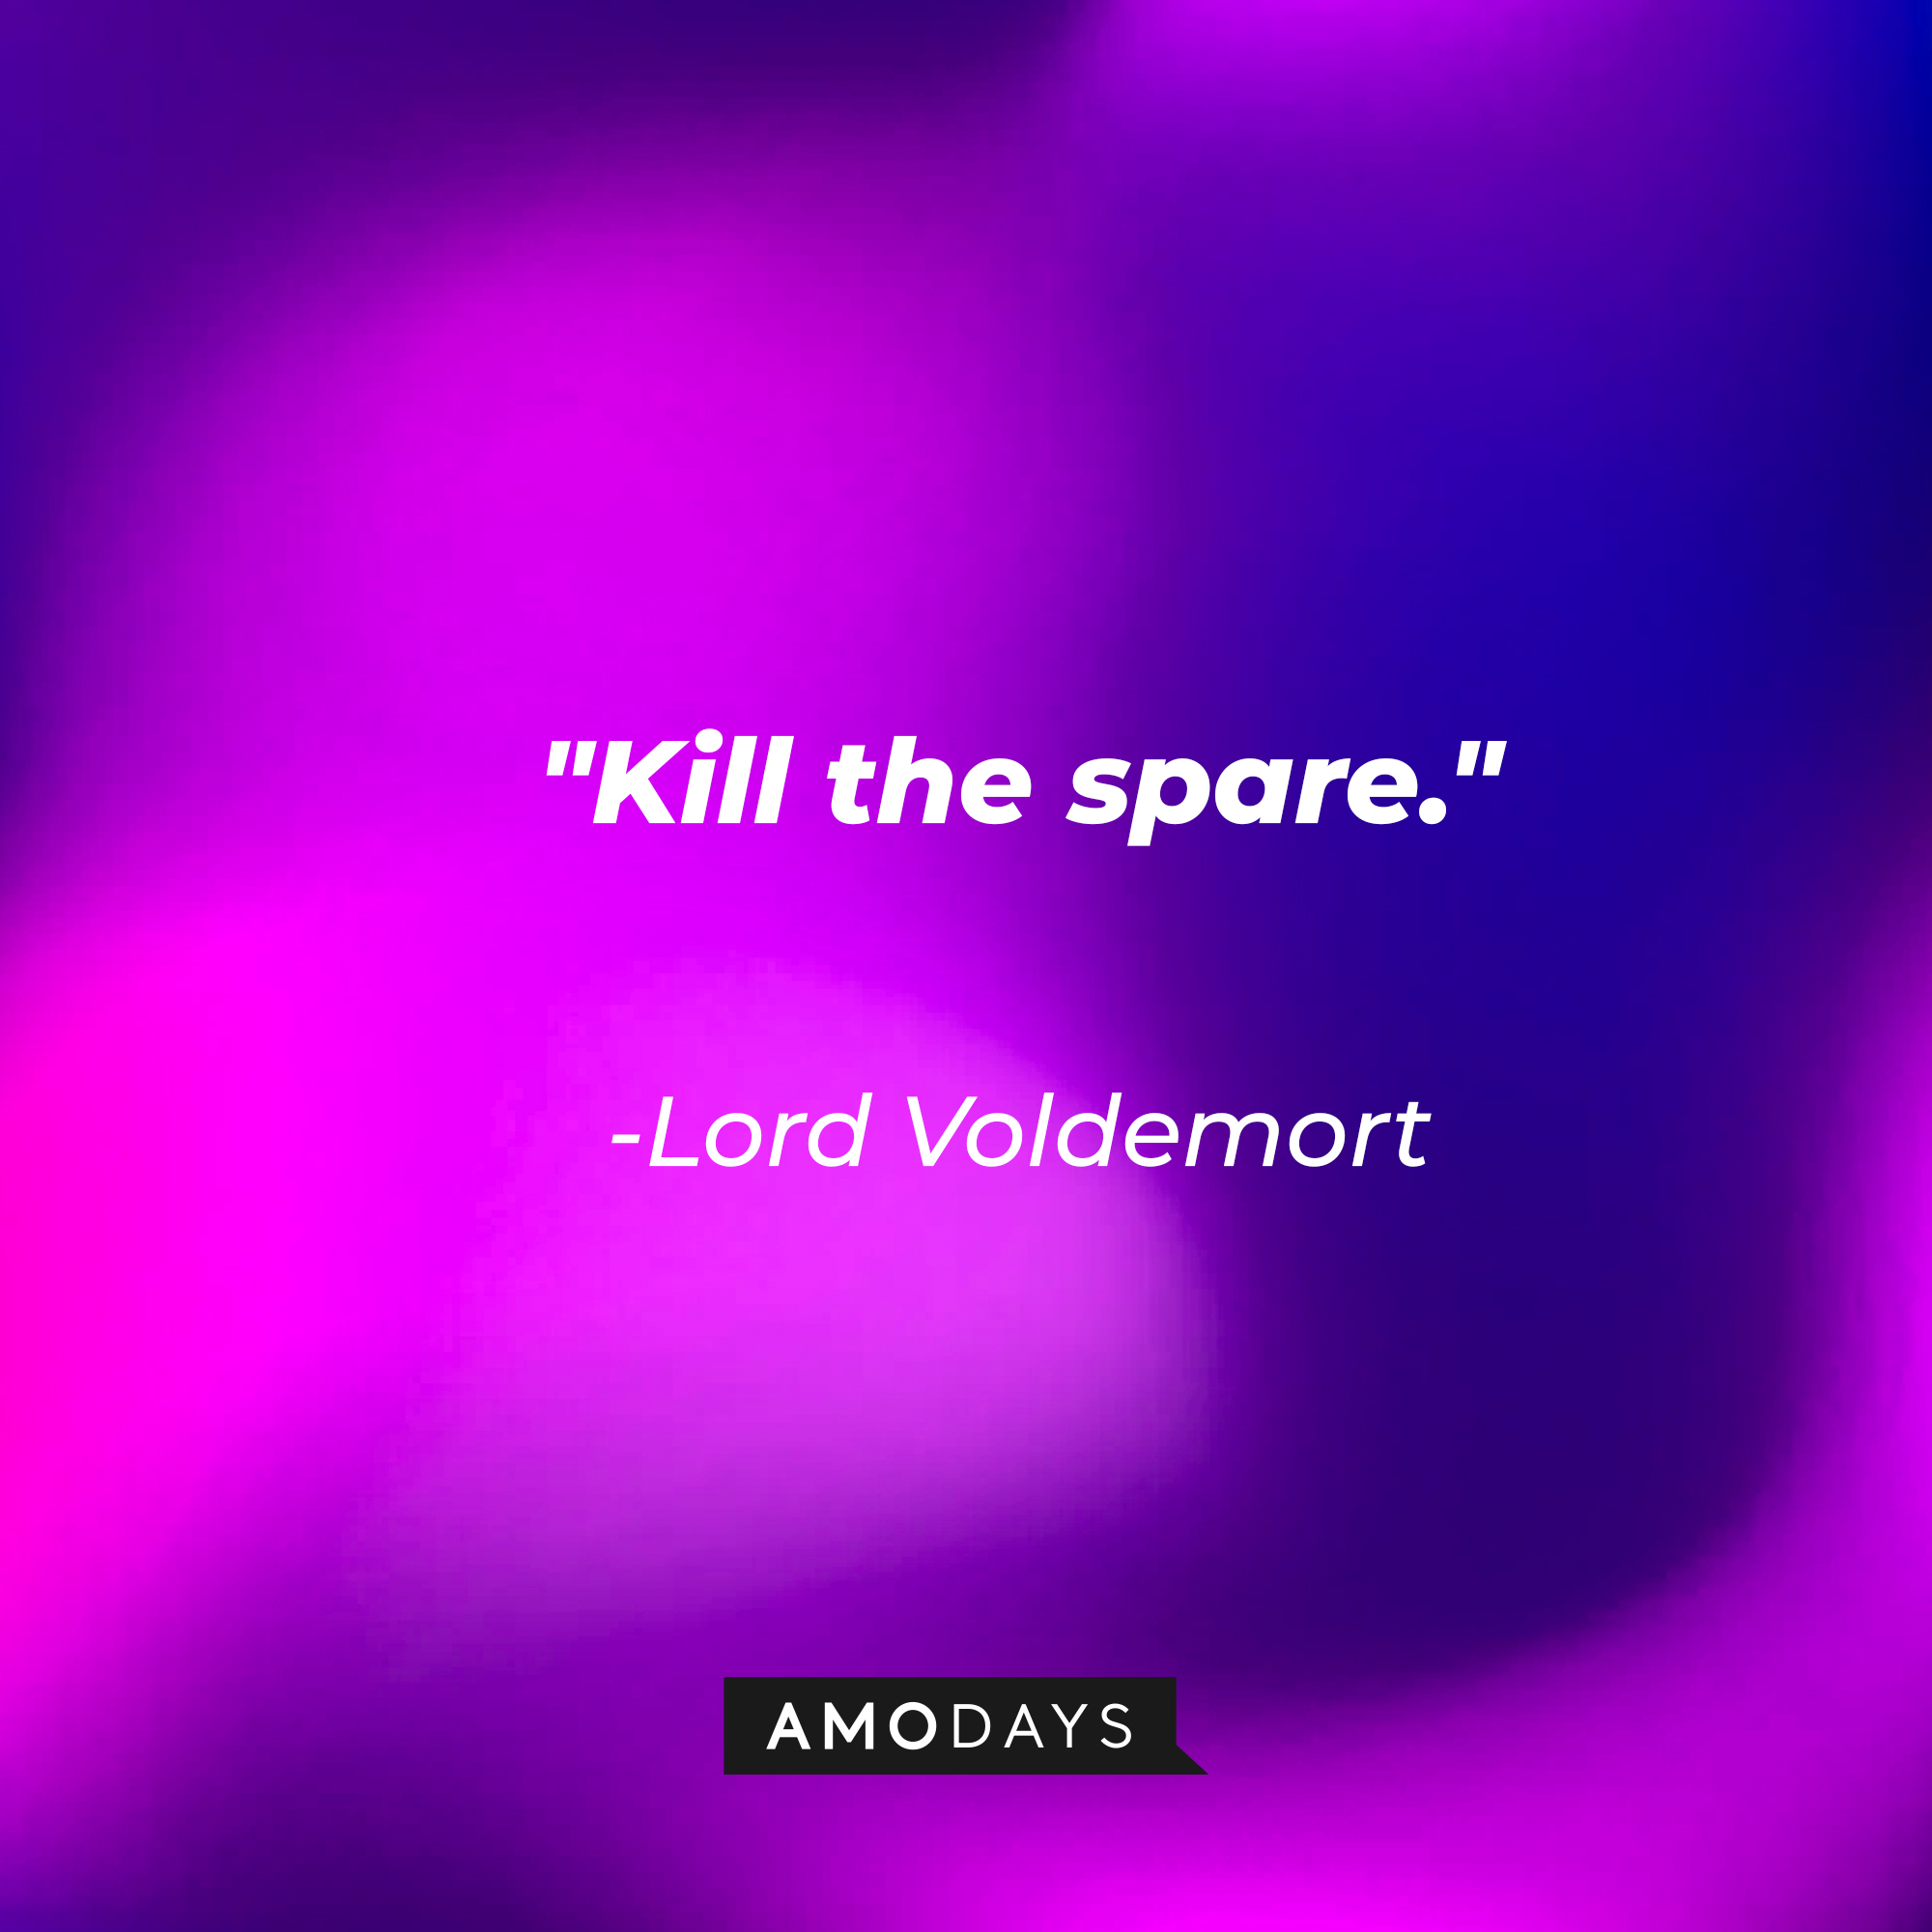 Lord Voldemort's quote: "Kill the spare." | Image: Amodays